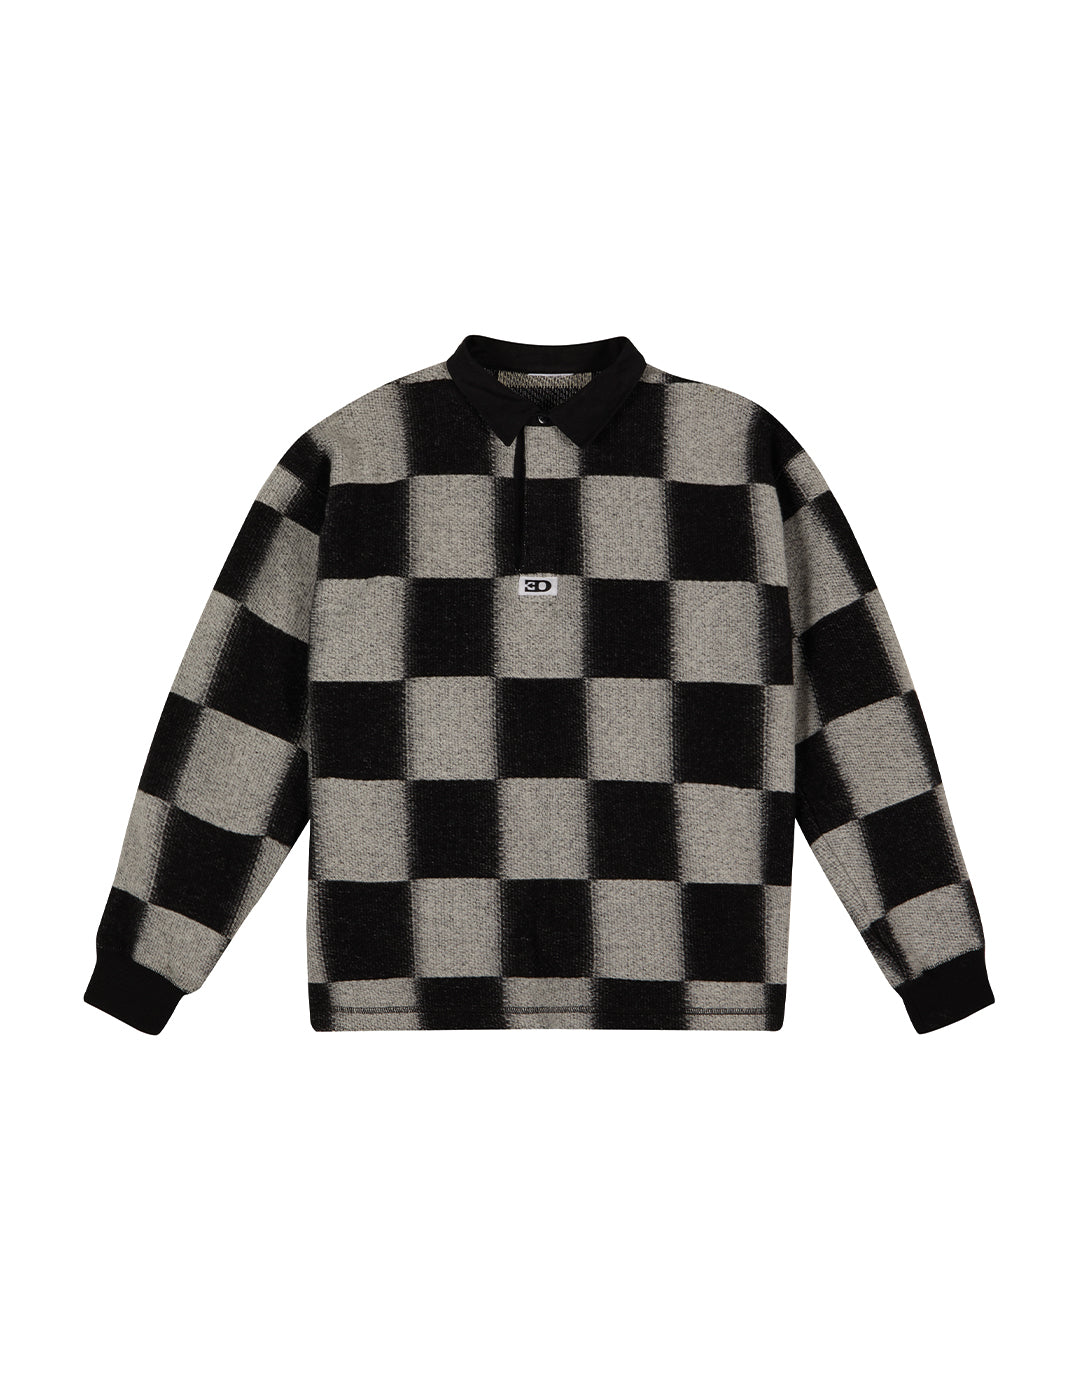 THE CHECKERED RUGBY SWEATSHIRT IN BLACK/ OFF-WHITE BRUSHED FLEECE